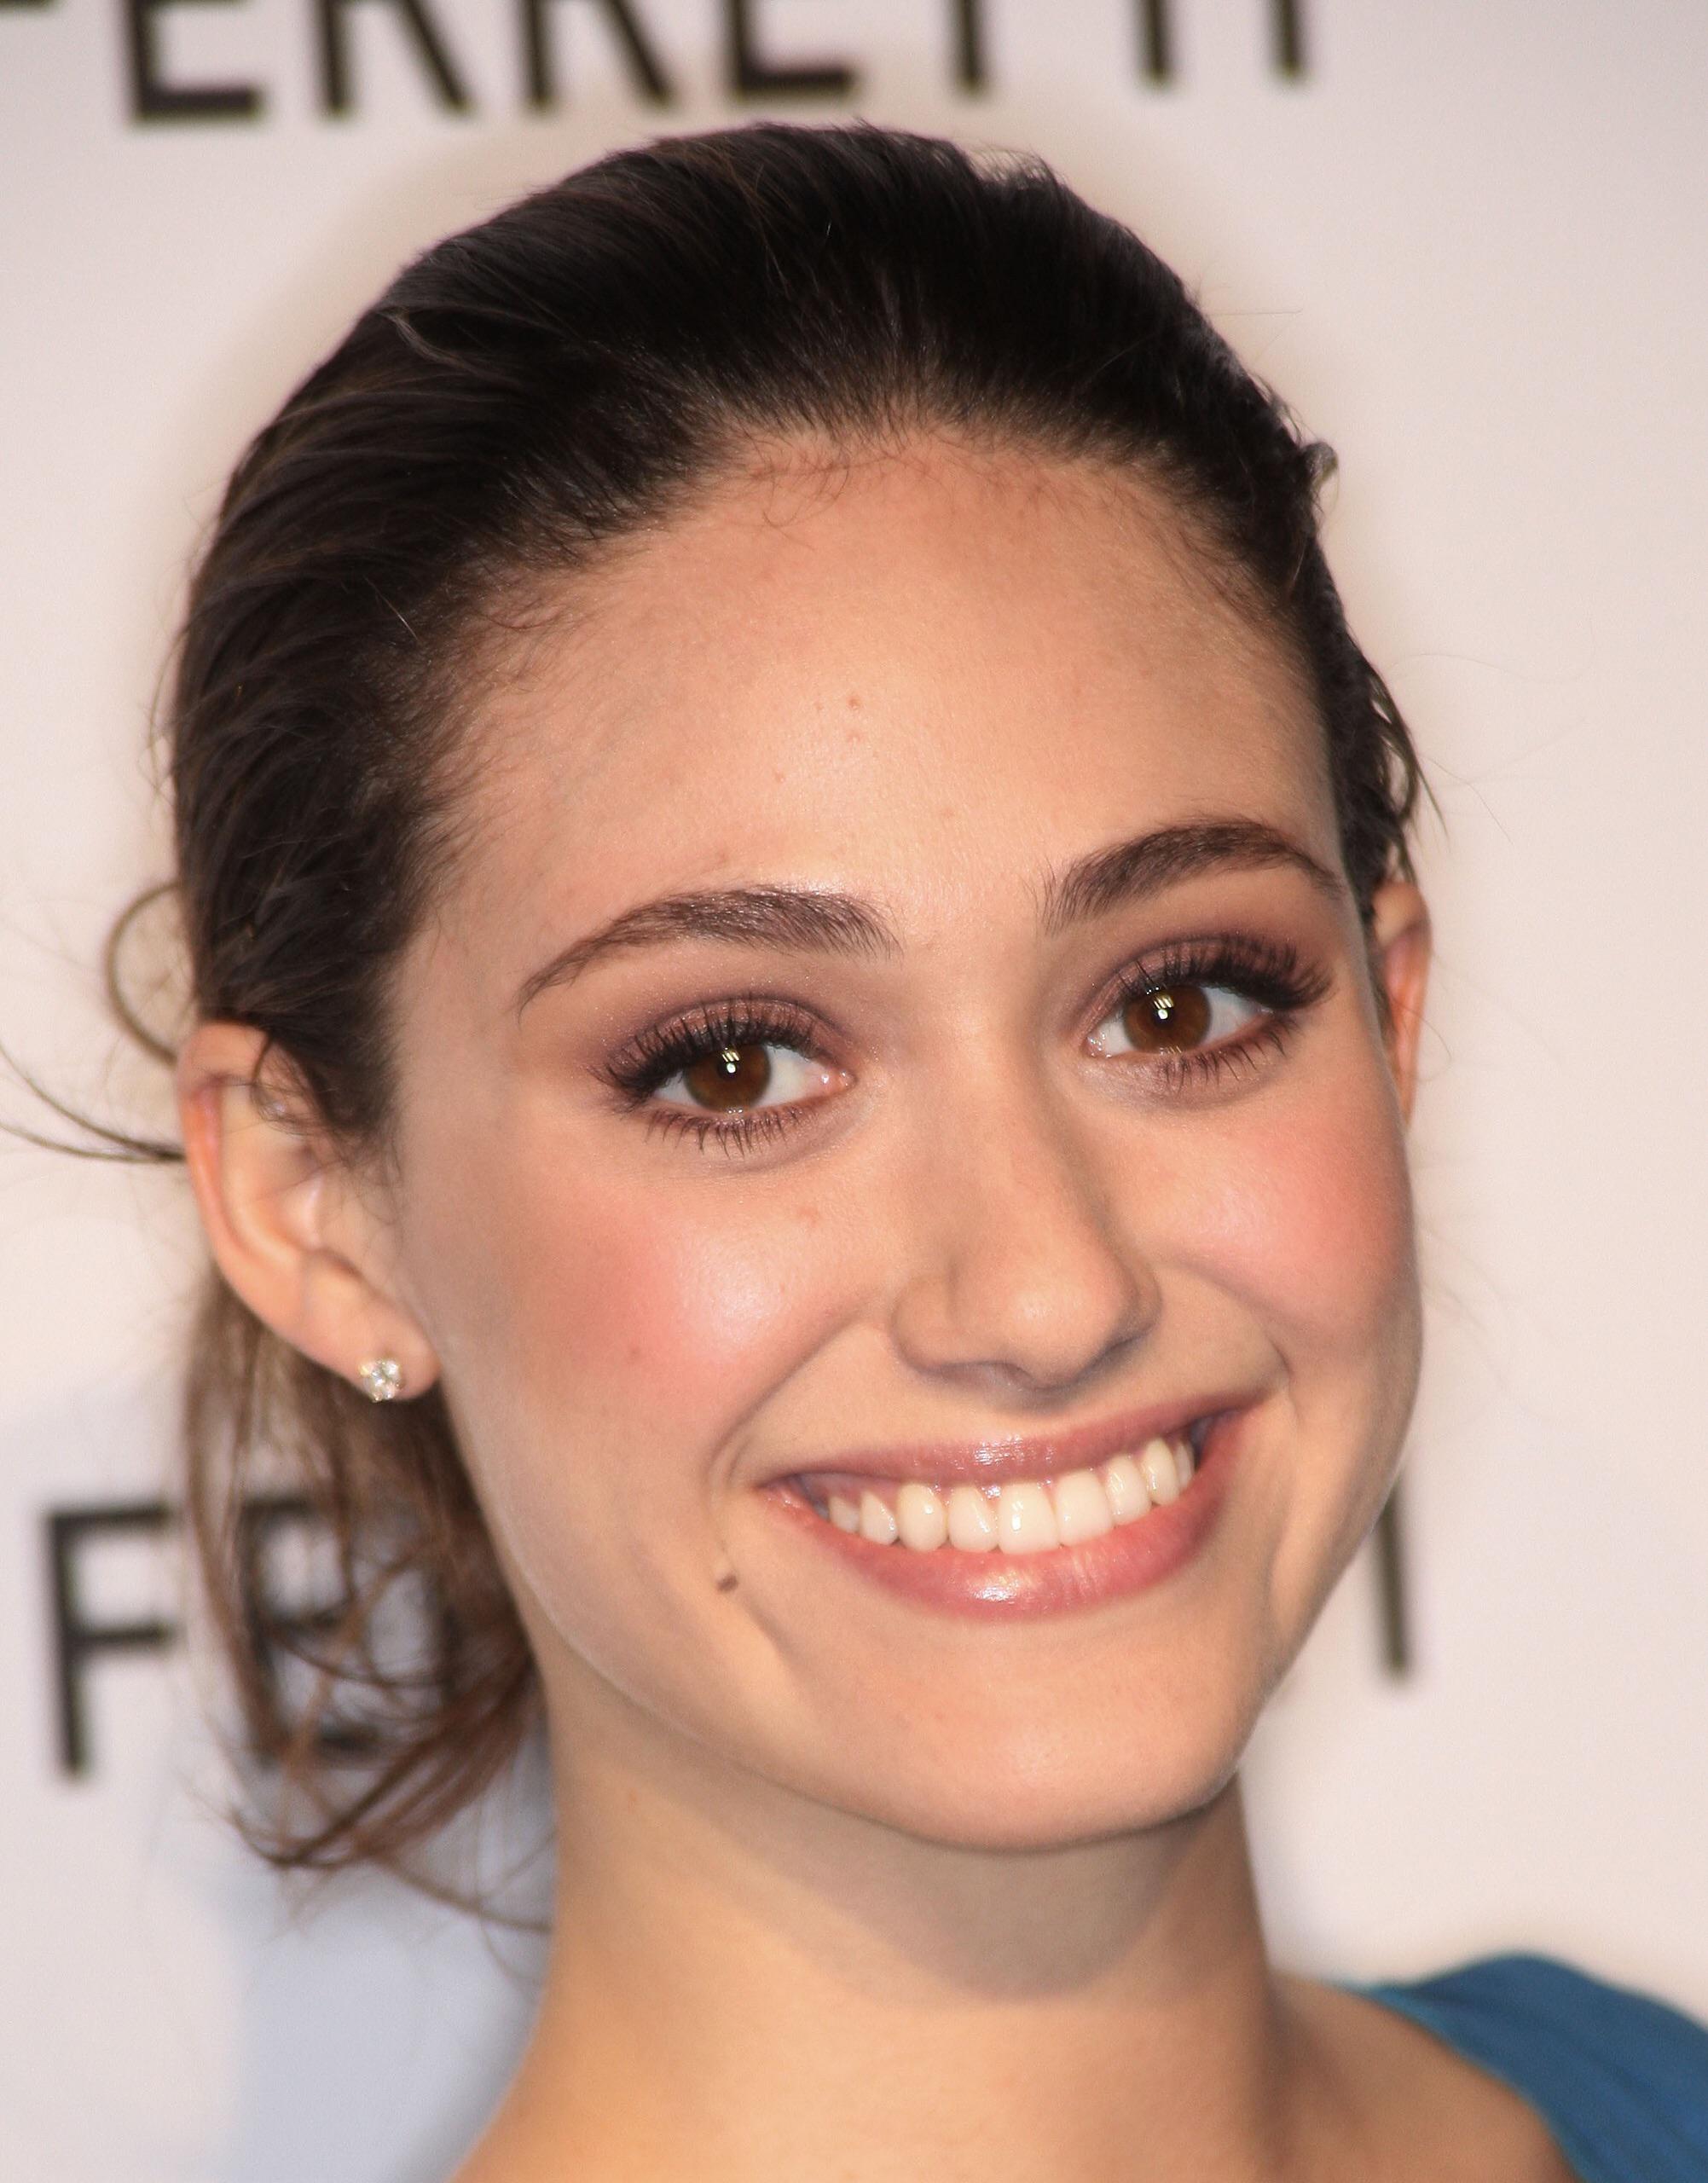 Emmy Rossum’s pretty face is enough to make me cum